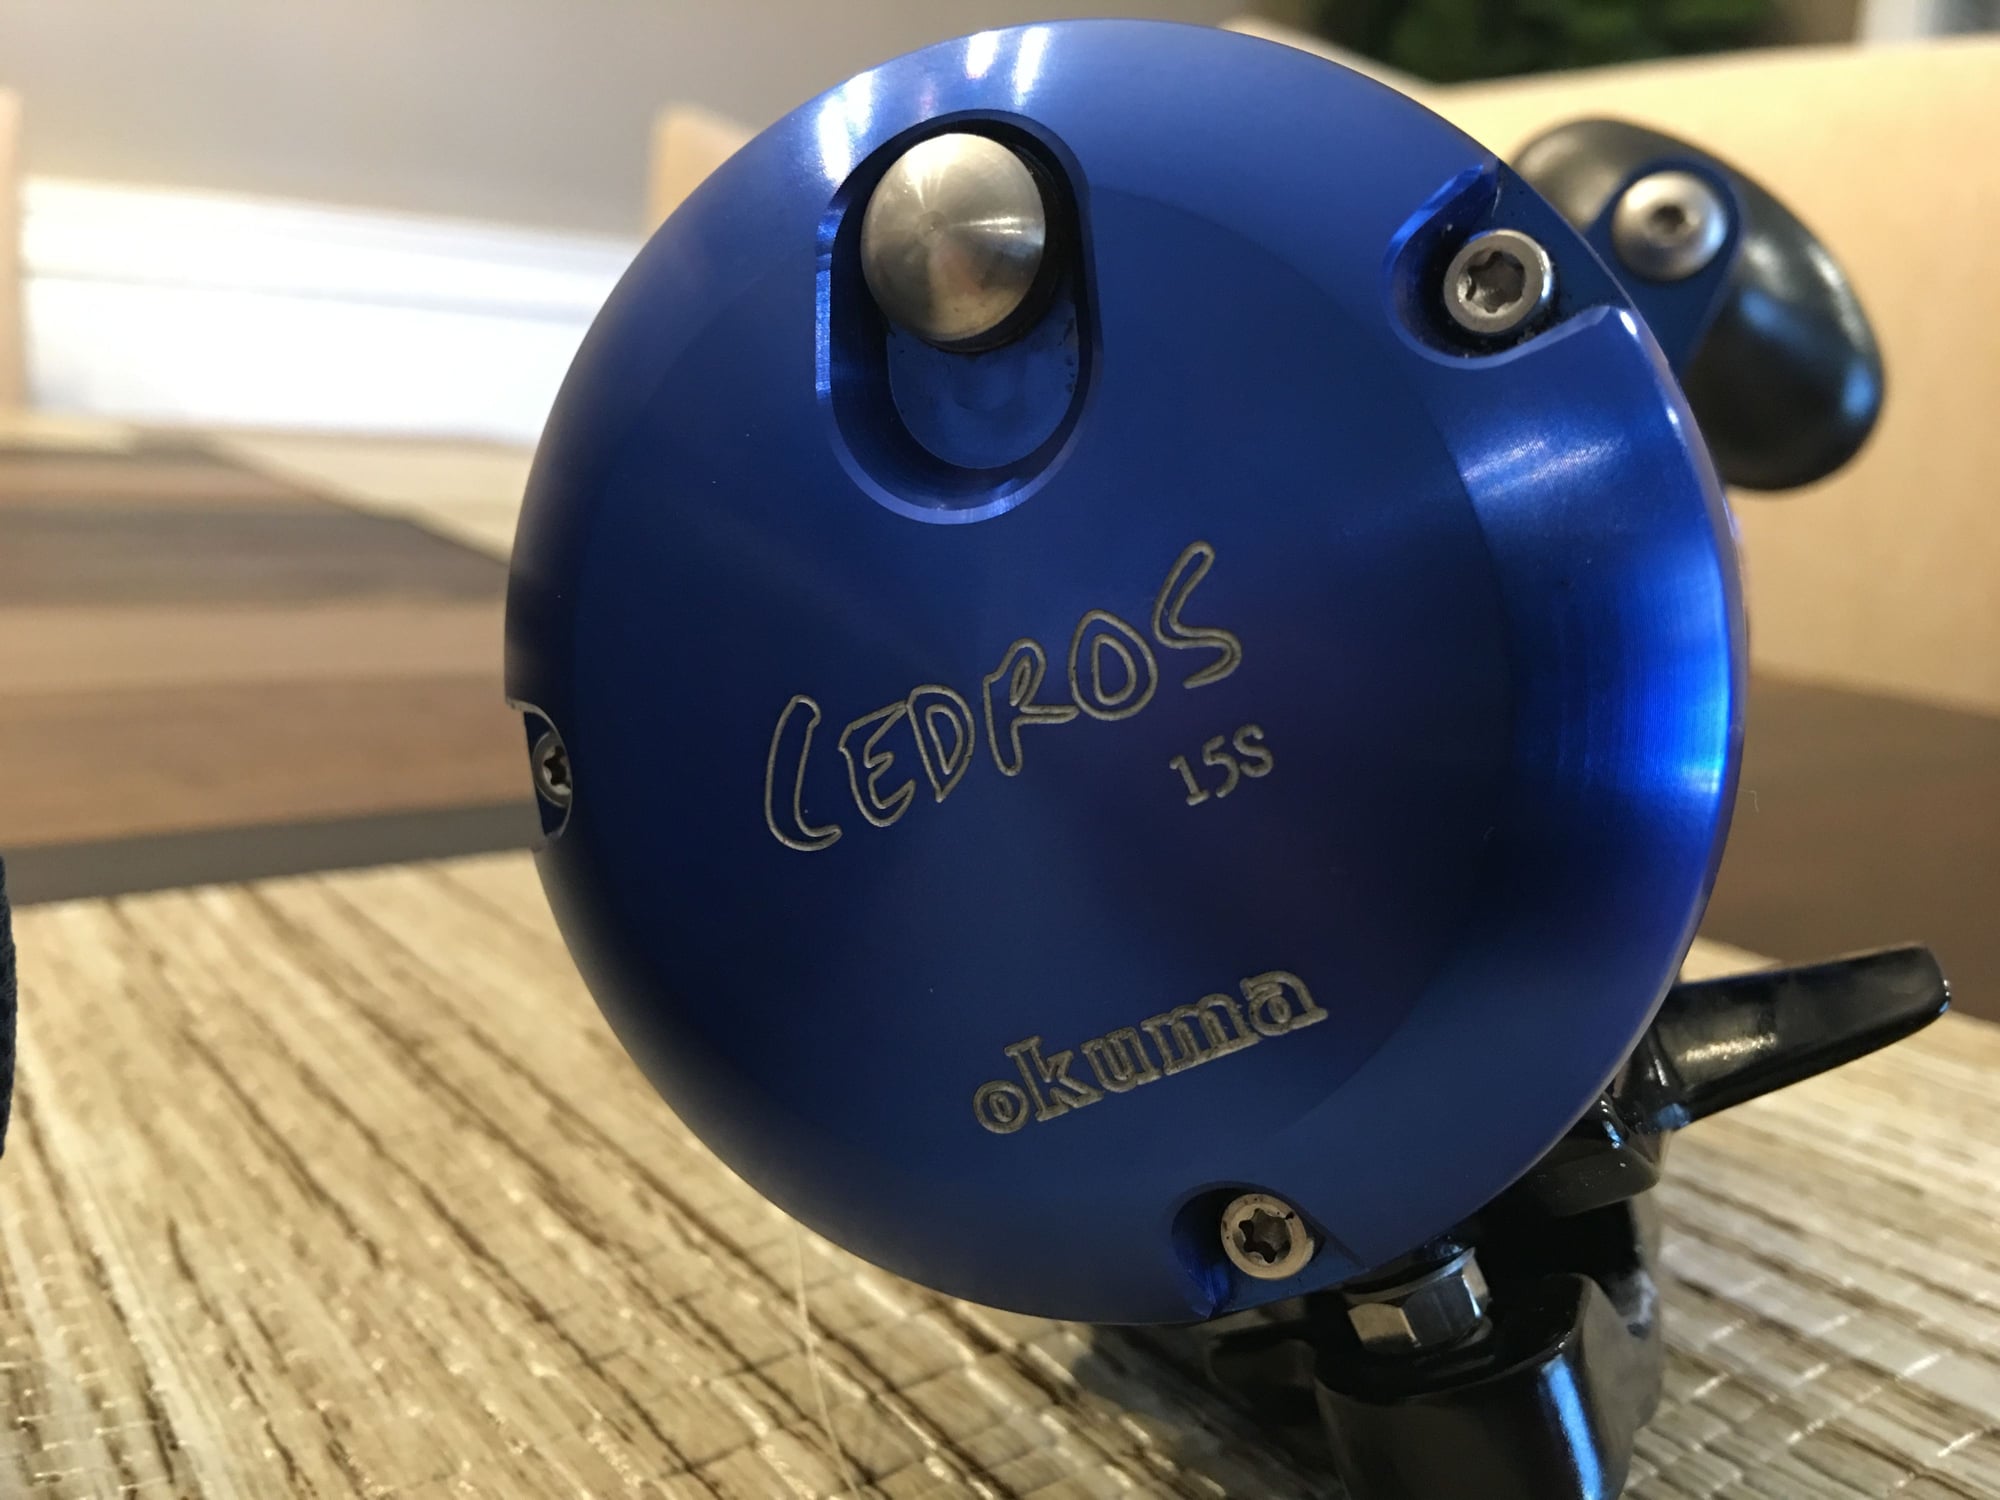 Okuma cedros 15s lever drag conventional reel - The Hull Truth - Boating  and Fishing Forum